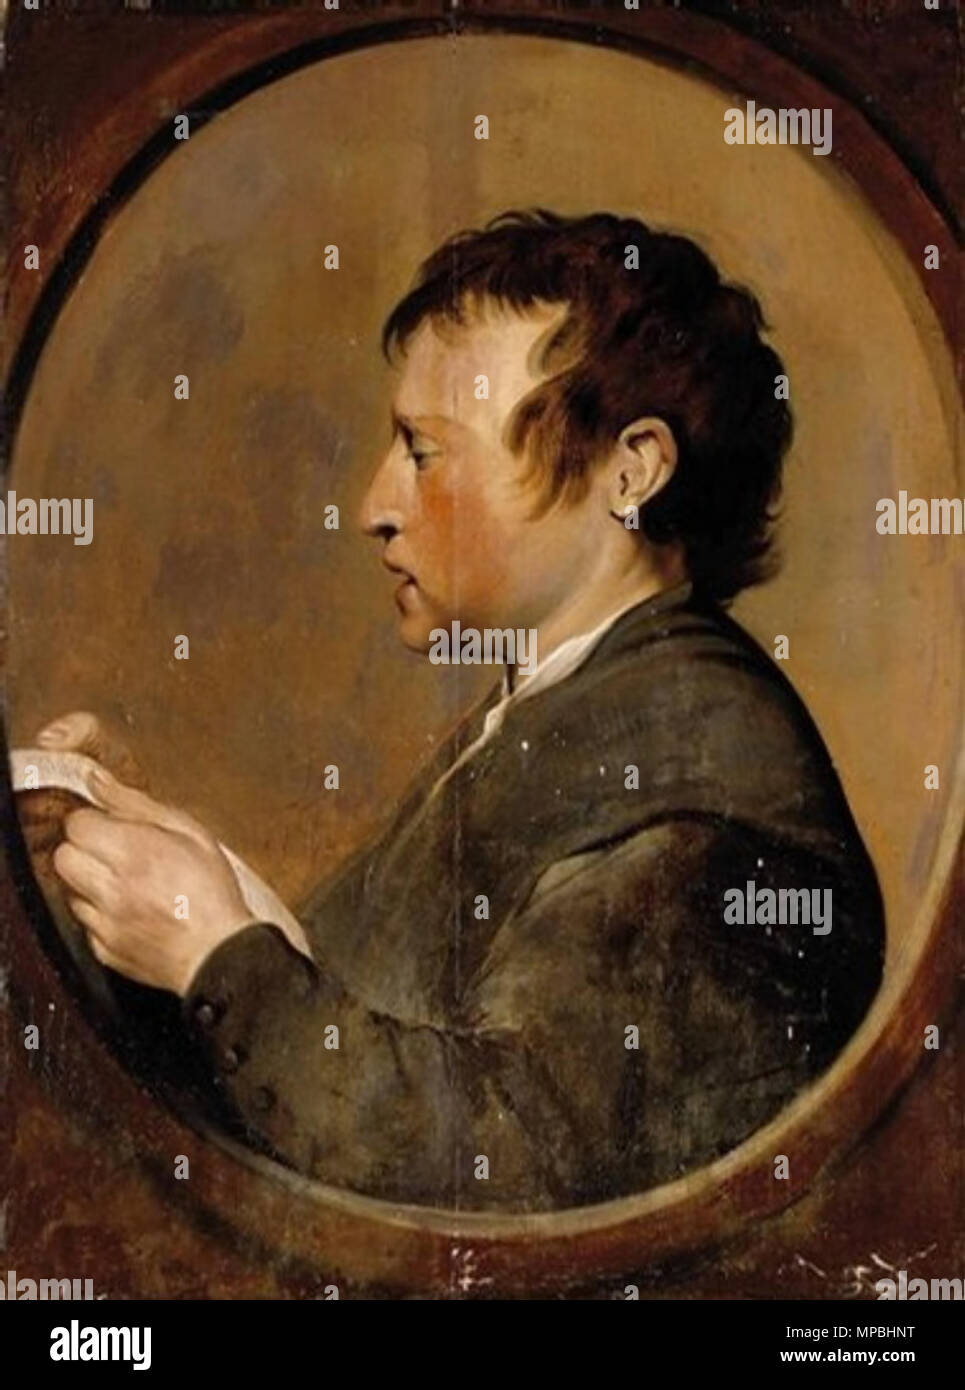 This is a handout image released by the auction house Christie's in London Tuesday April 22, 2008 of the oil painting 'A Boy, in Profile, Singing, in a Feigned Oval' by Pieter de Grebber dates from the late 1620s.  The 17th-century Dutch painting whose Jewish owner was killed during World War II is to be auctioned this week after Poland helped broker an agreement between his descendants and the current owner, an official said Tuesday. (AP Photo/Christie's, Ho)  **  NO SALES  **   Q11824939 .  English: A Boy, in profile, singing, in a feigned oval. Nederlands: Een jongen, en profil, zingend, in Stock Photo